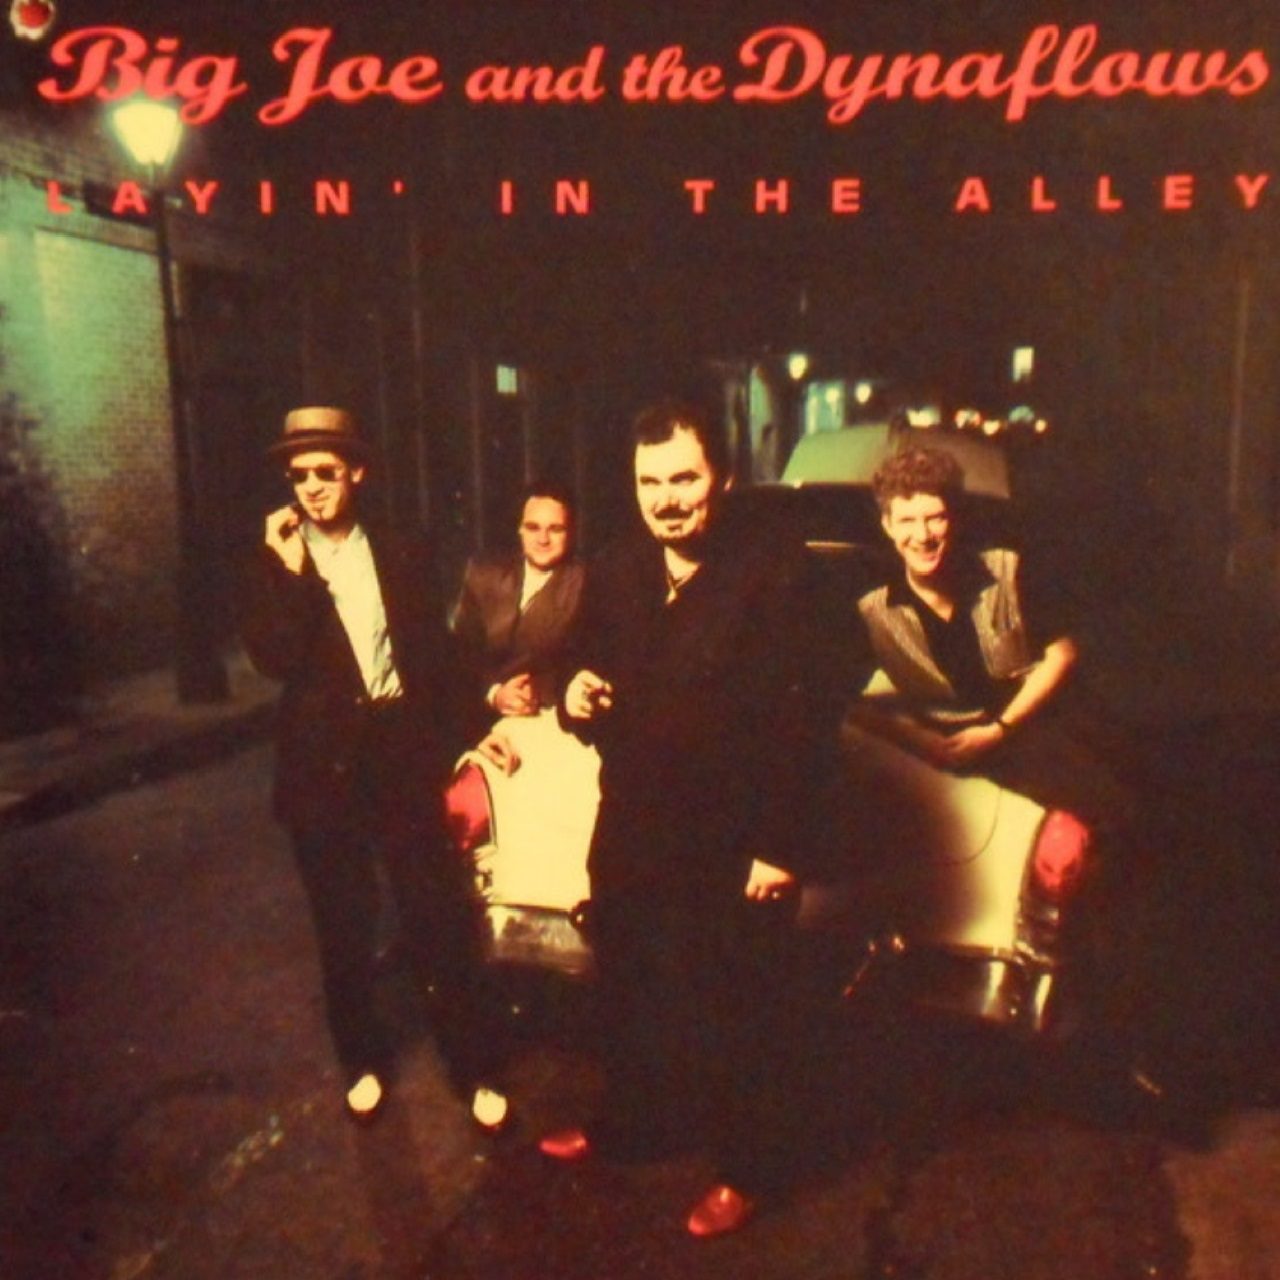 Big Joe And The Dynaflows – Layin’ In The Alley cover album